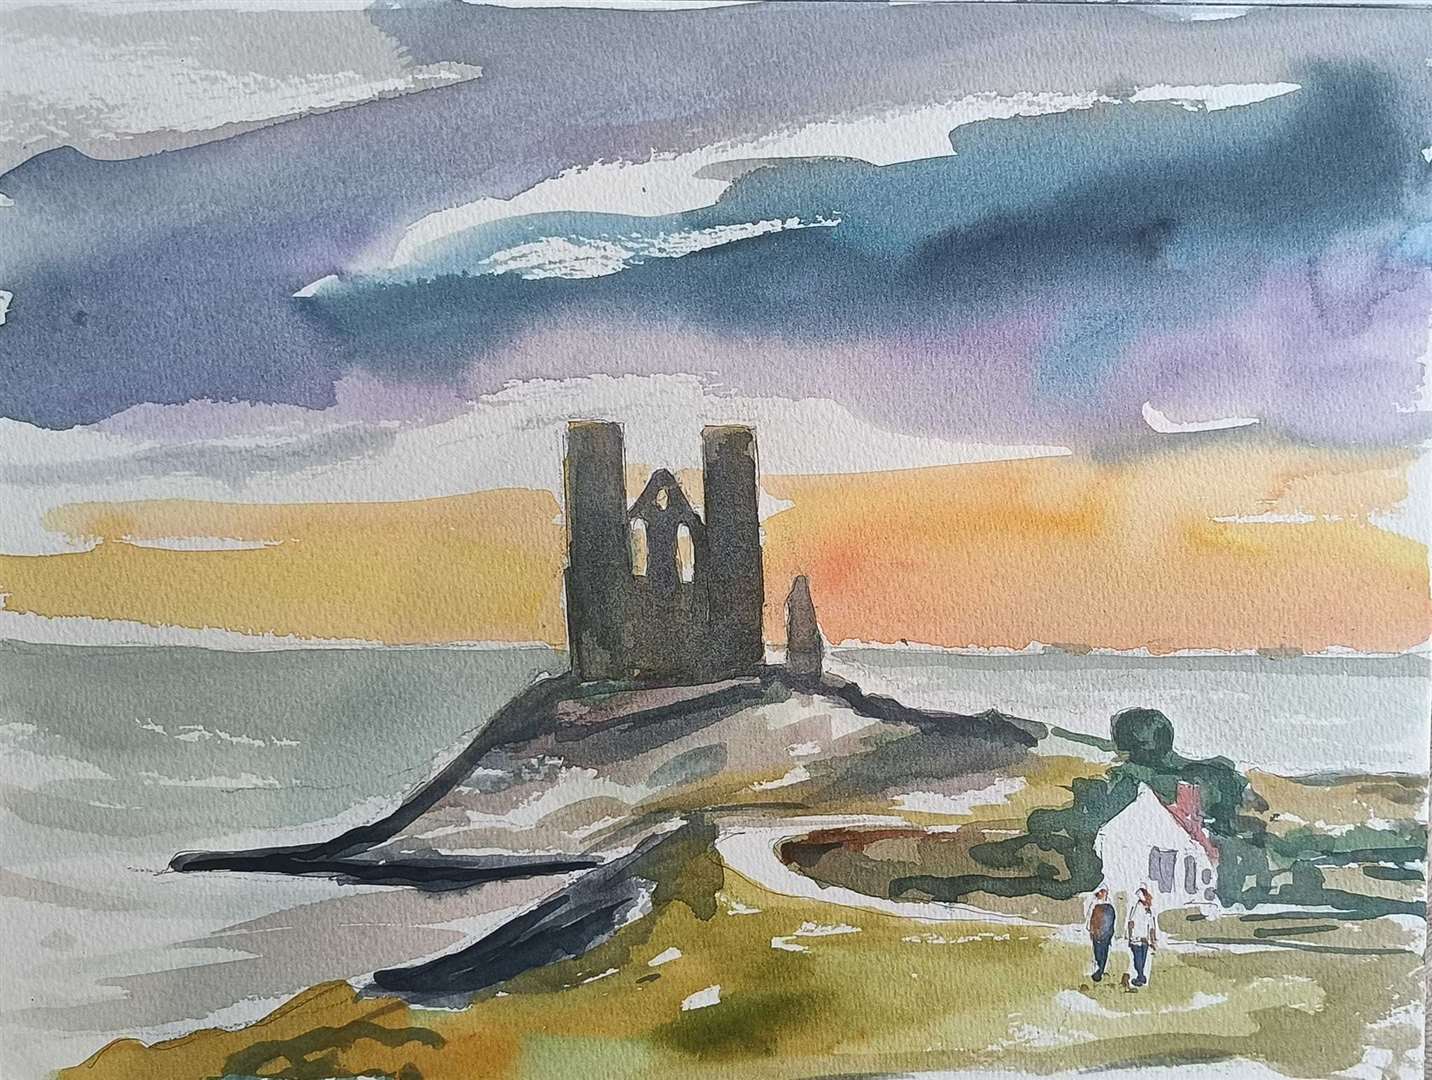 Reculver Towers painted by Timmy Mallett. Copyright Timmy Mallett www.mallettspallette.co.uk